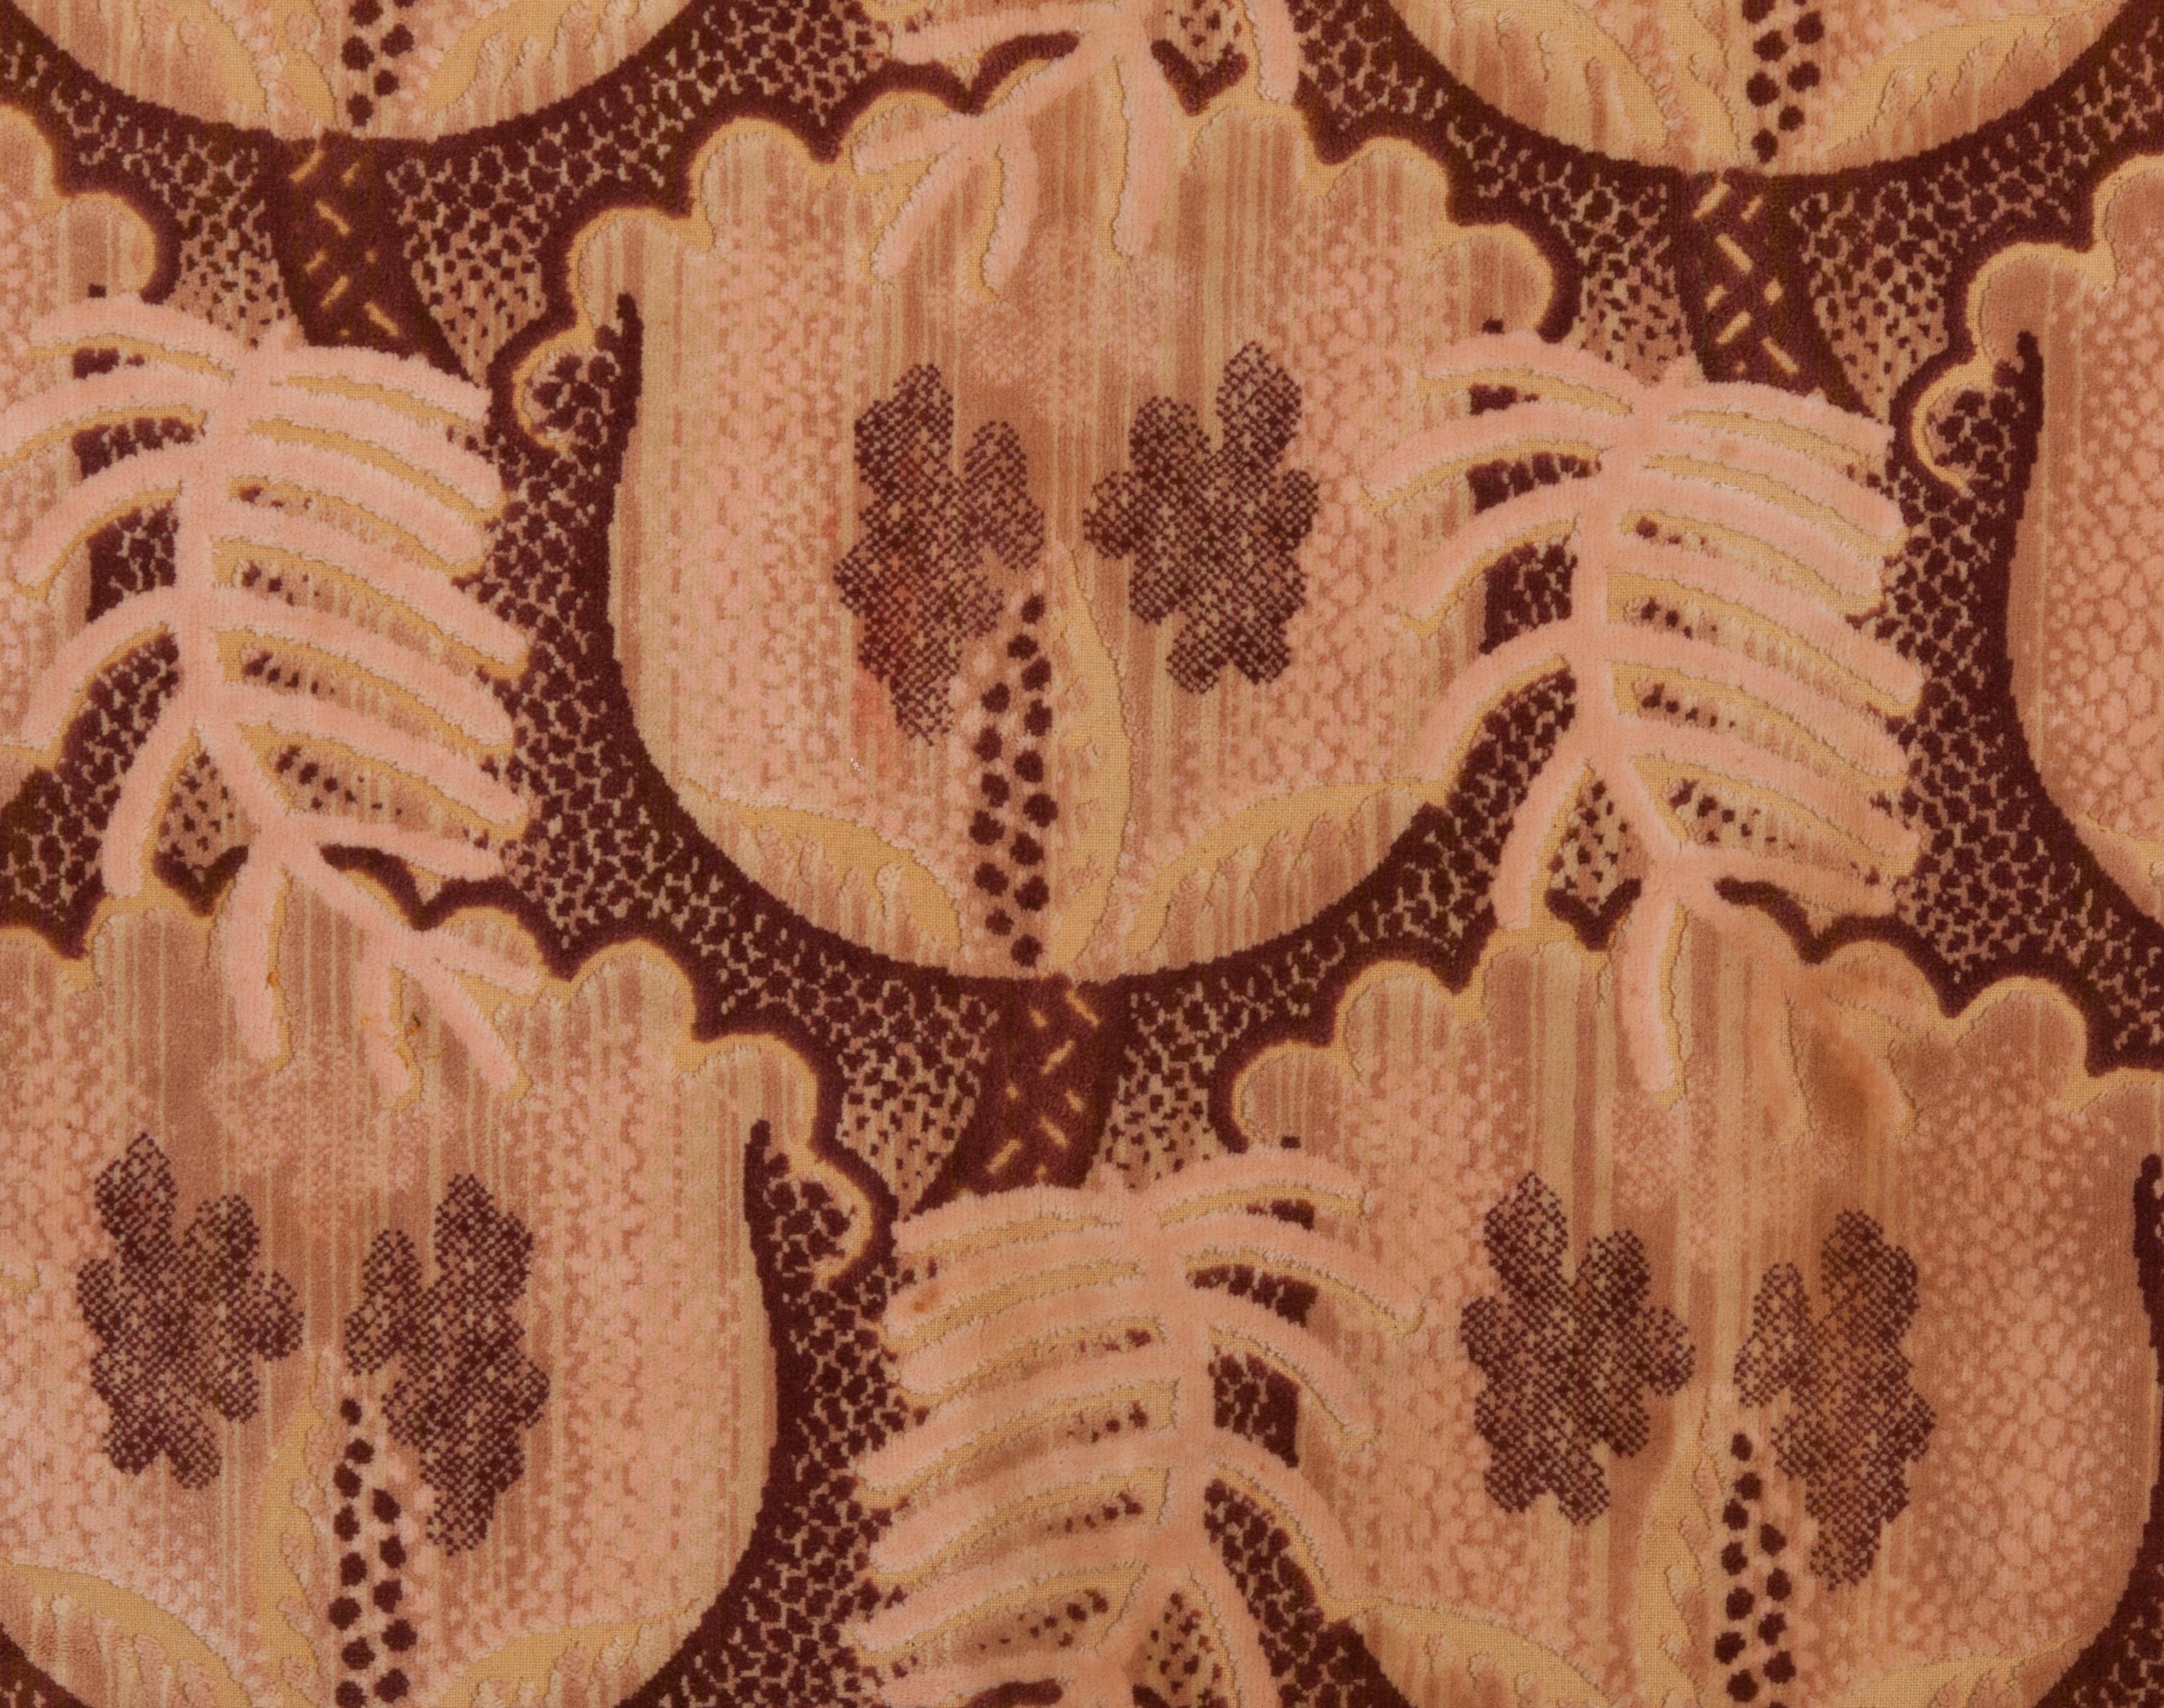 An industrially manufactured Art Nouveau voided velvet furnishing fabric in a bold stylized leaf/flower design. Made in the UK, early 20th century.